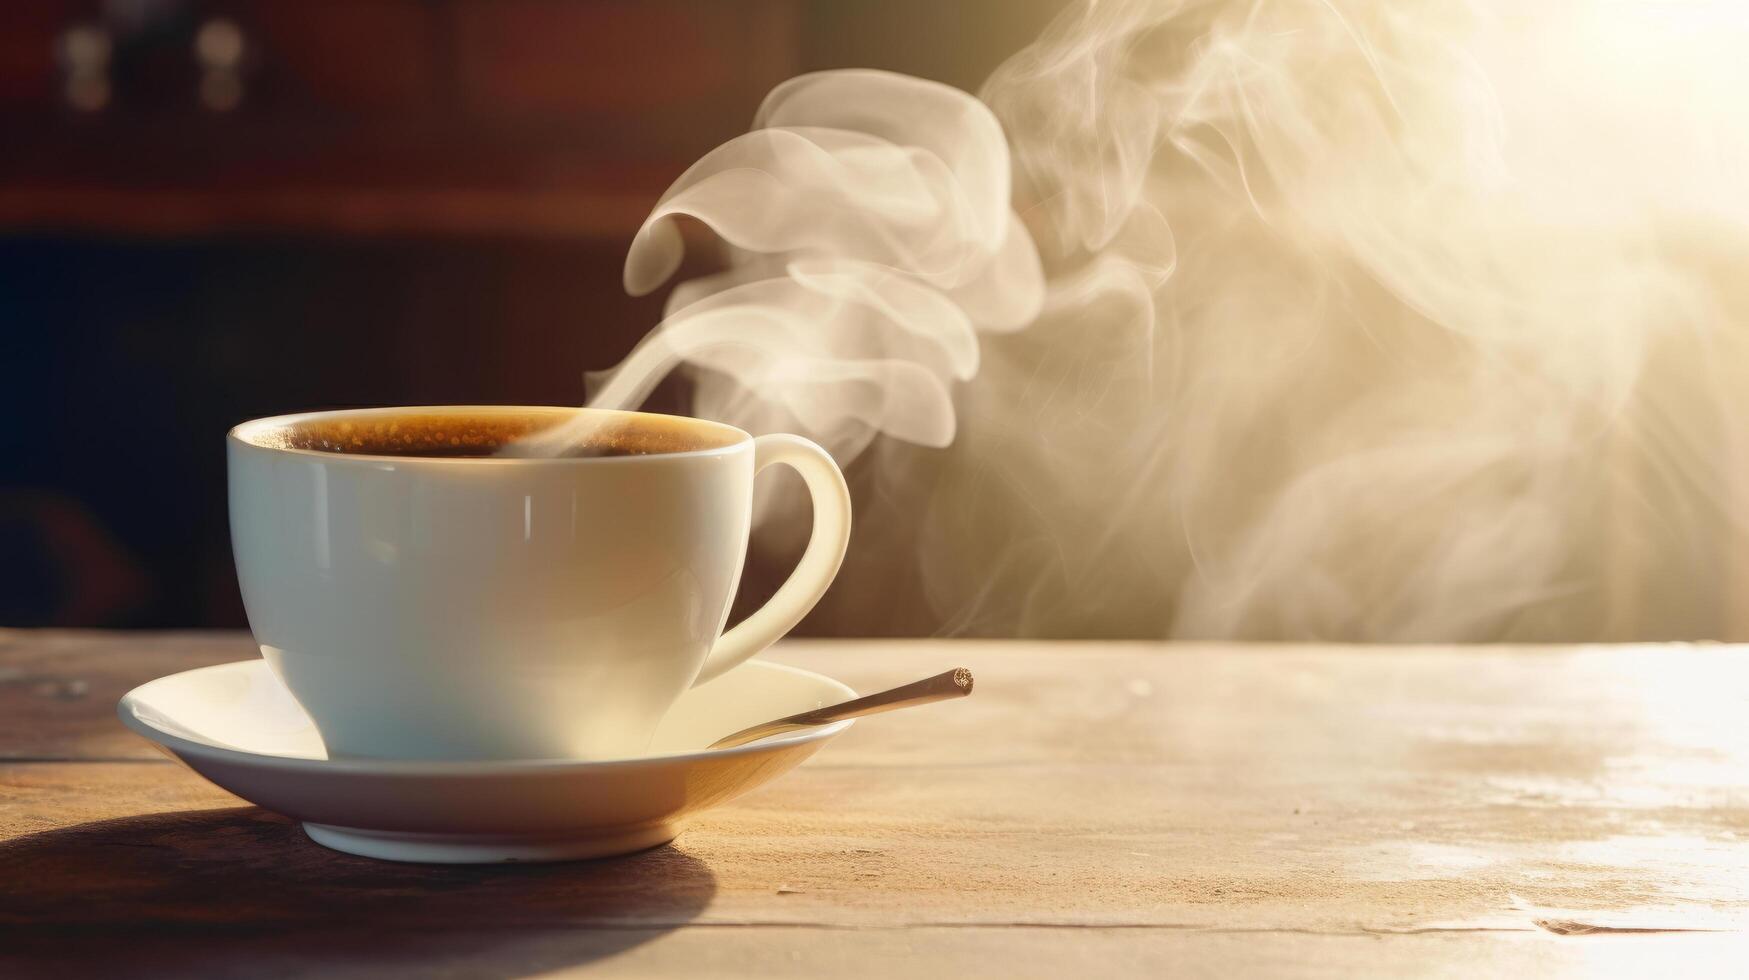 Steaming cup of coffee. Illustration photo